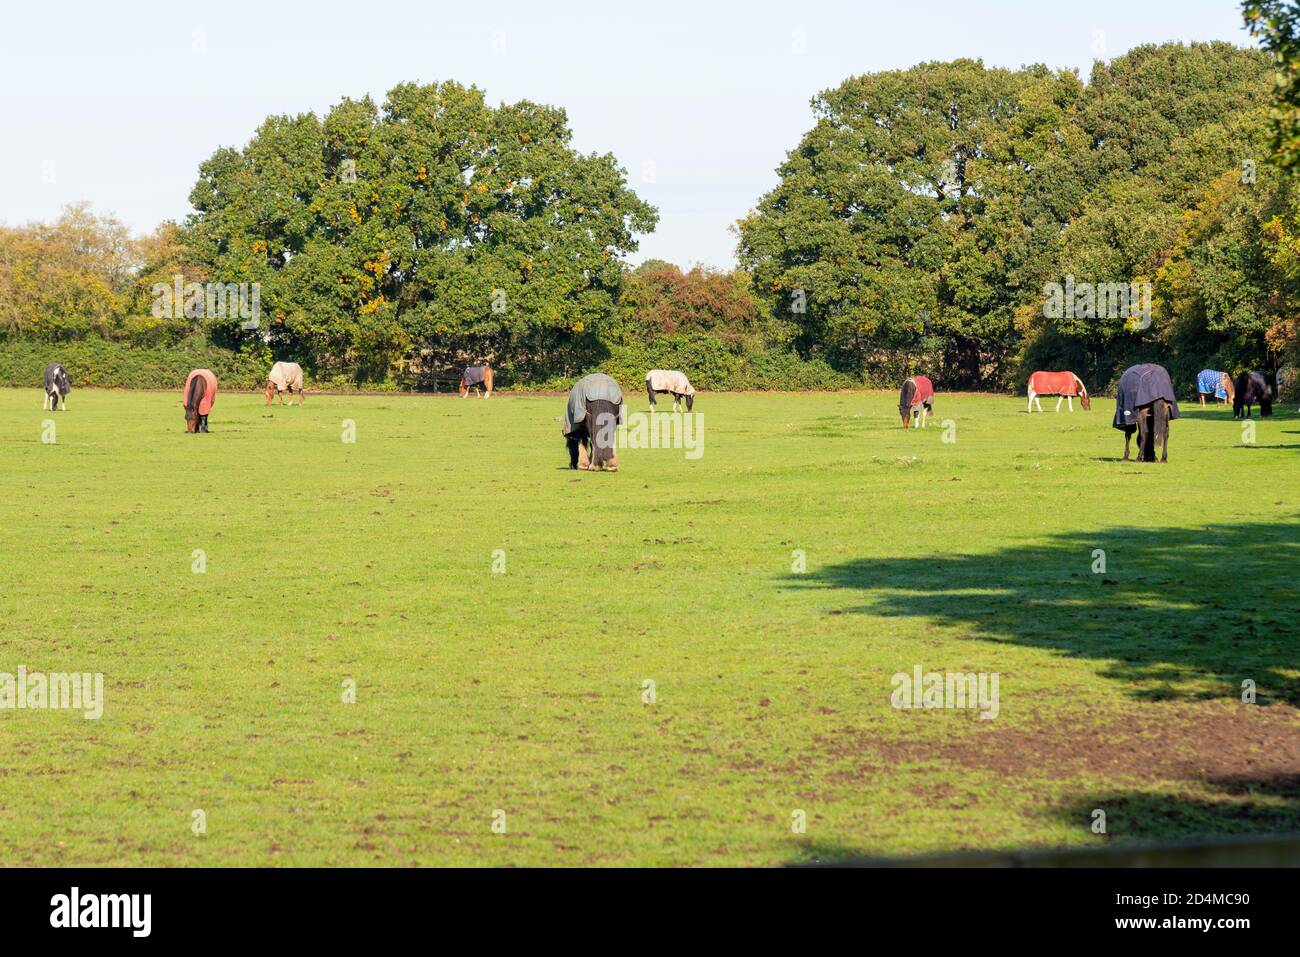 Horses in a green field in Autumn, wearing coats. Paddock with trees. Hawkwell, Rochford, Essex, UK. Bright, sunny day Stock Photo